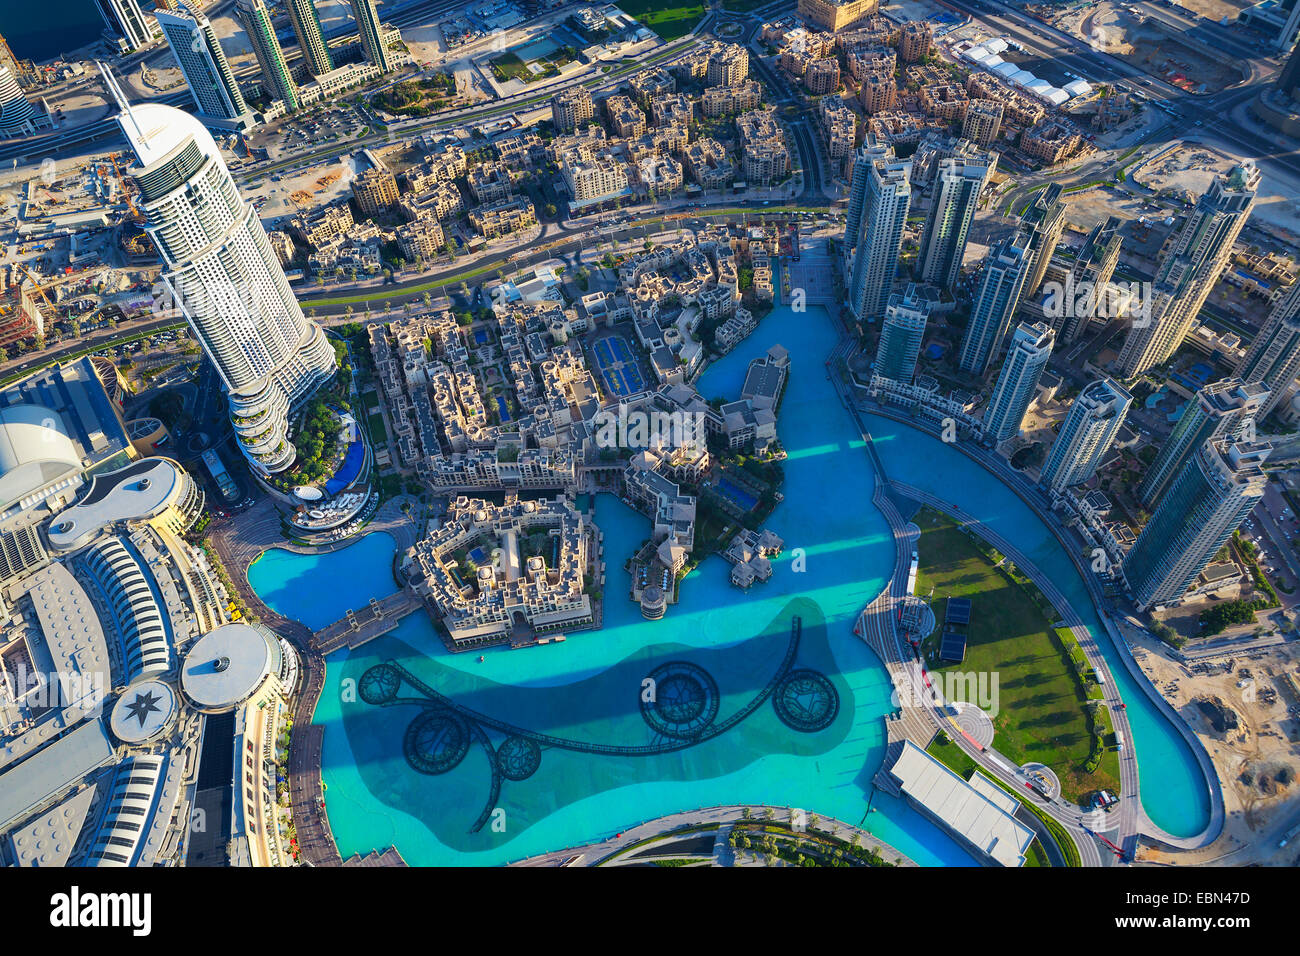 View of Dubai city from the top of a tower. Stock Photo